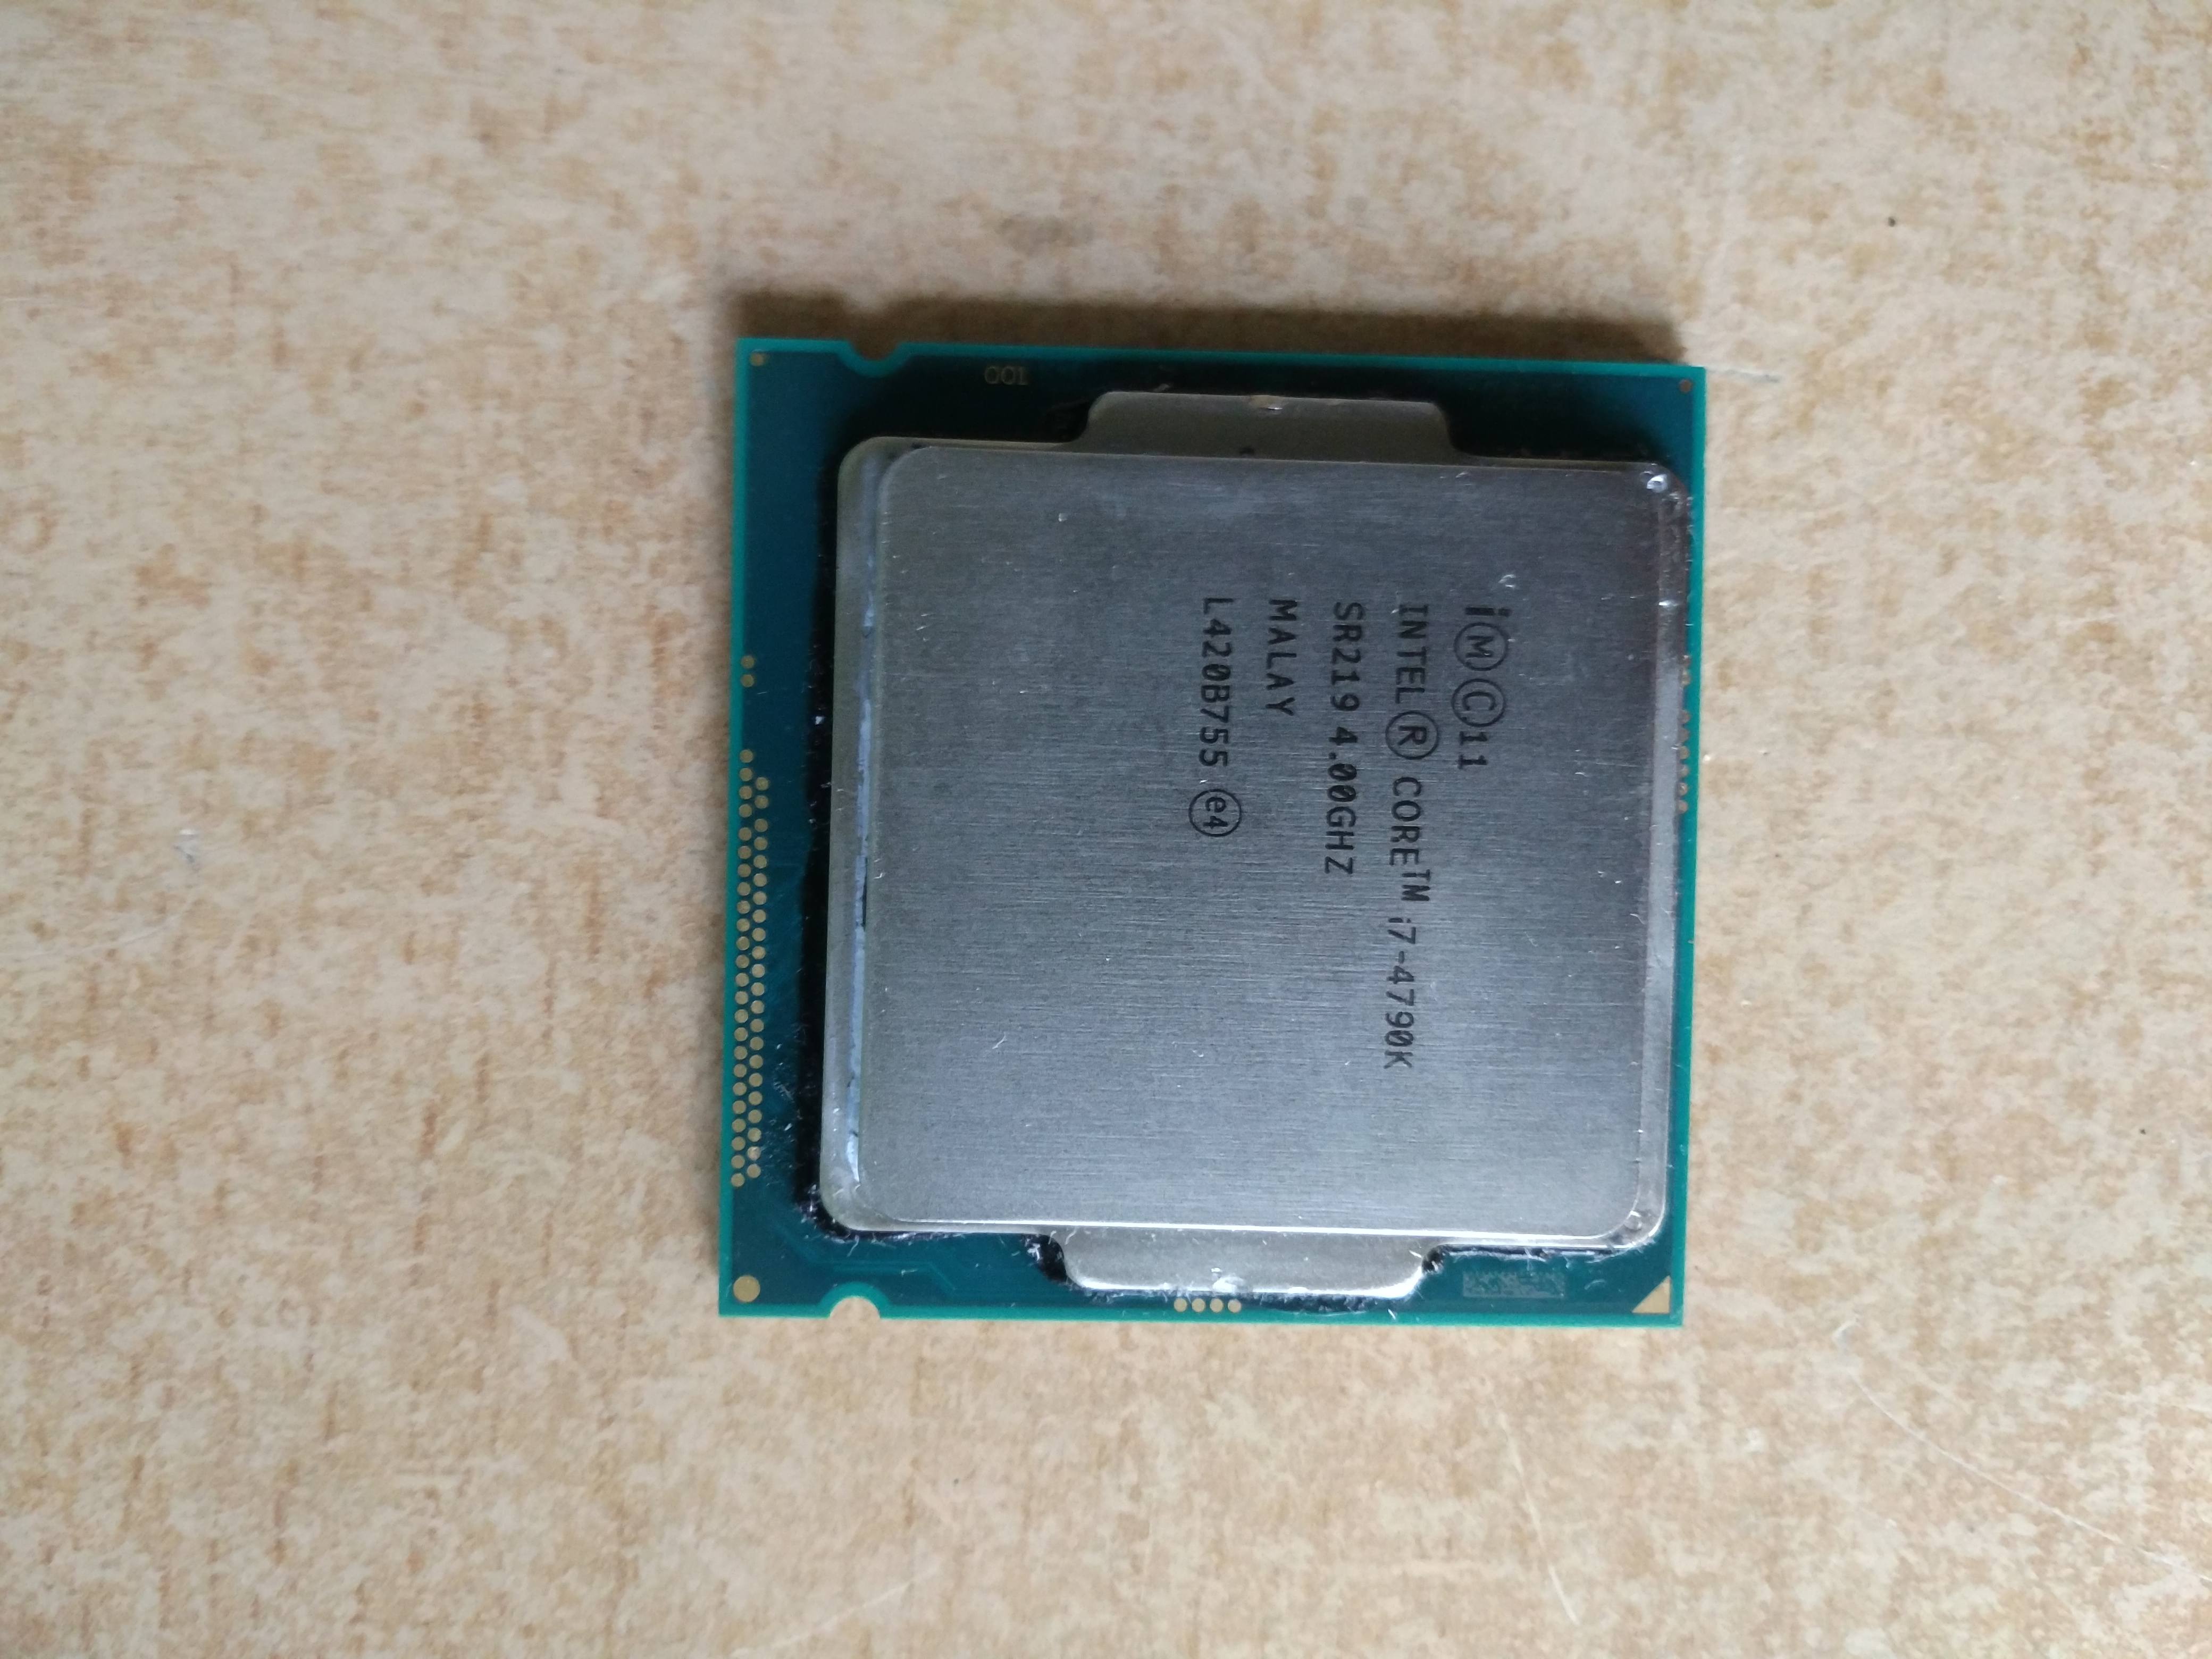 I just got this cpu from ebay - CPUs, Motherboards, and Memory - Linus